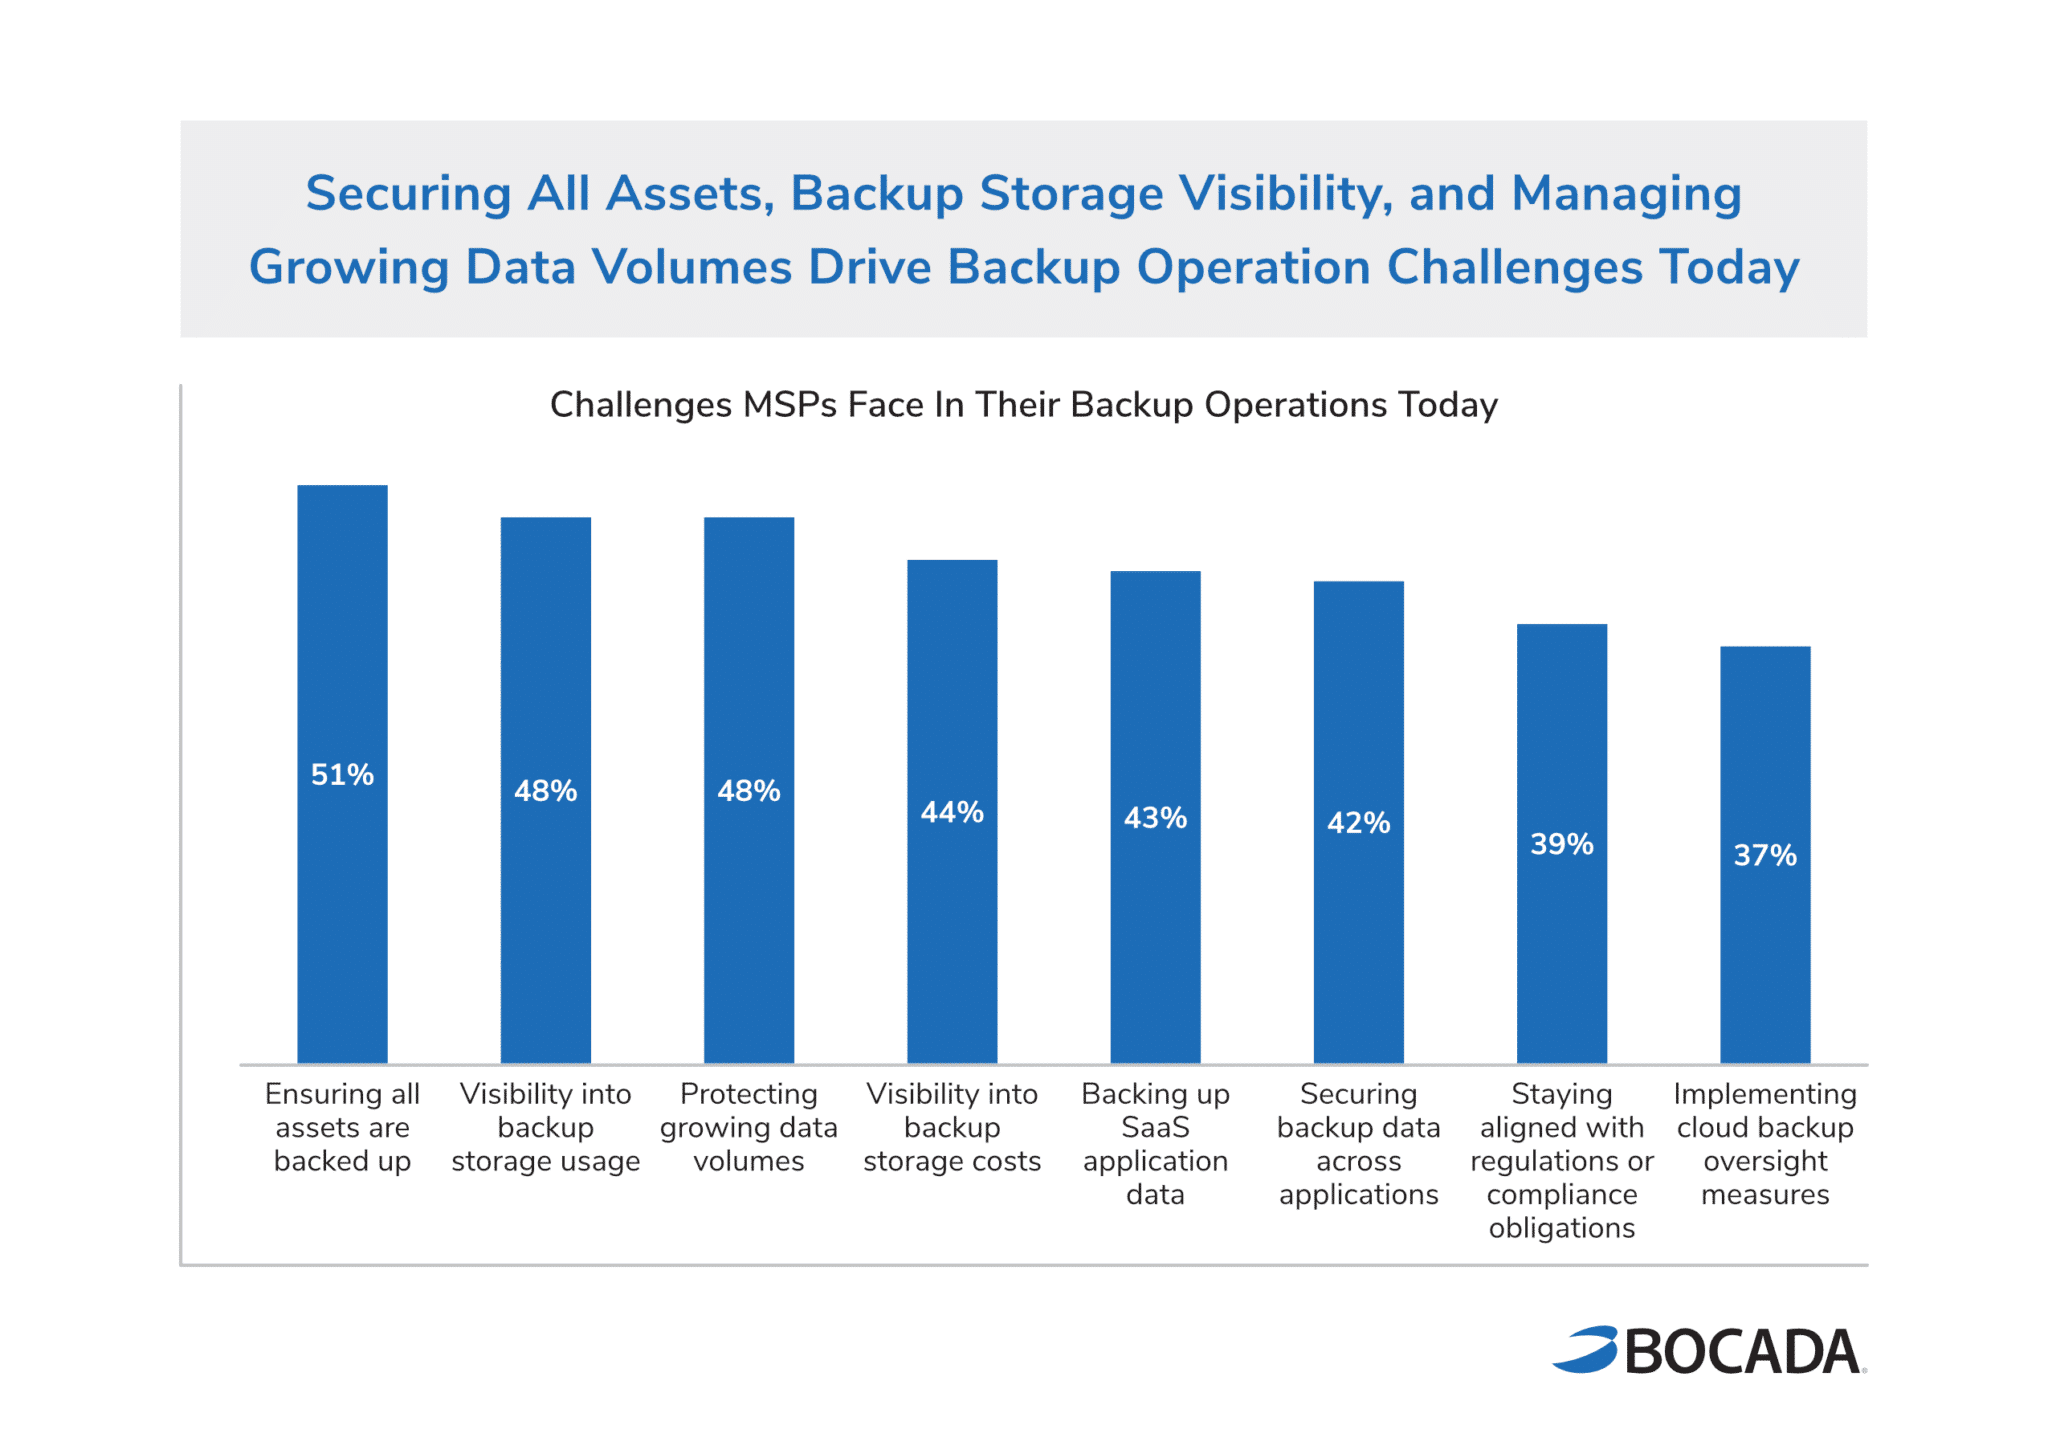 MSP Backup Monitoring Challenges Today